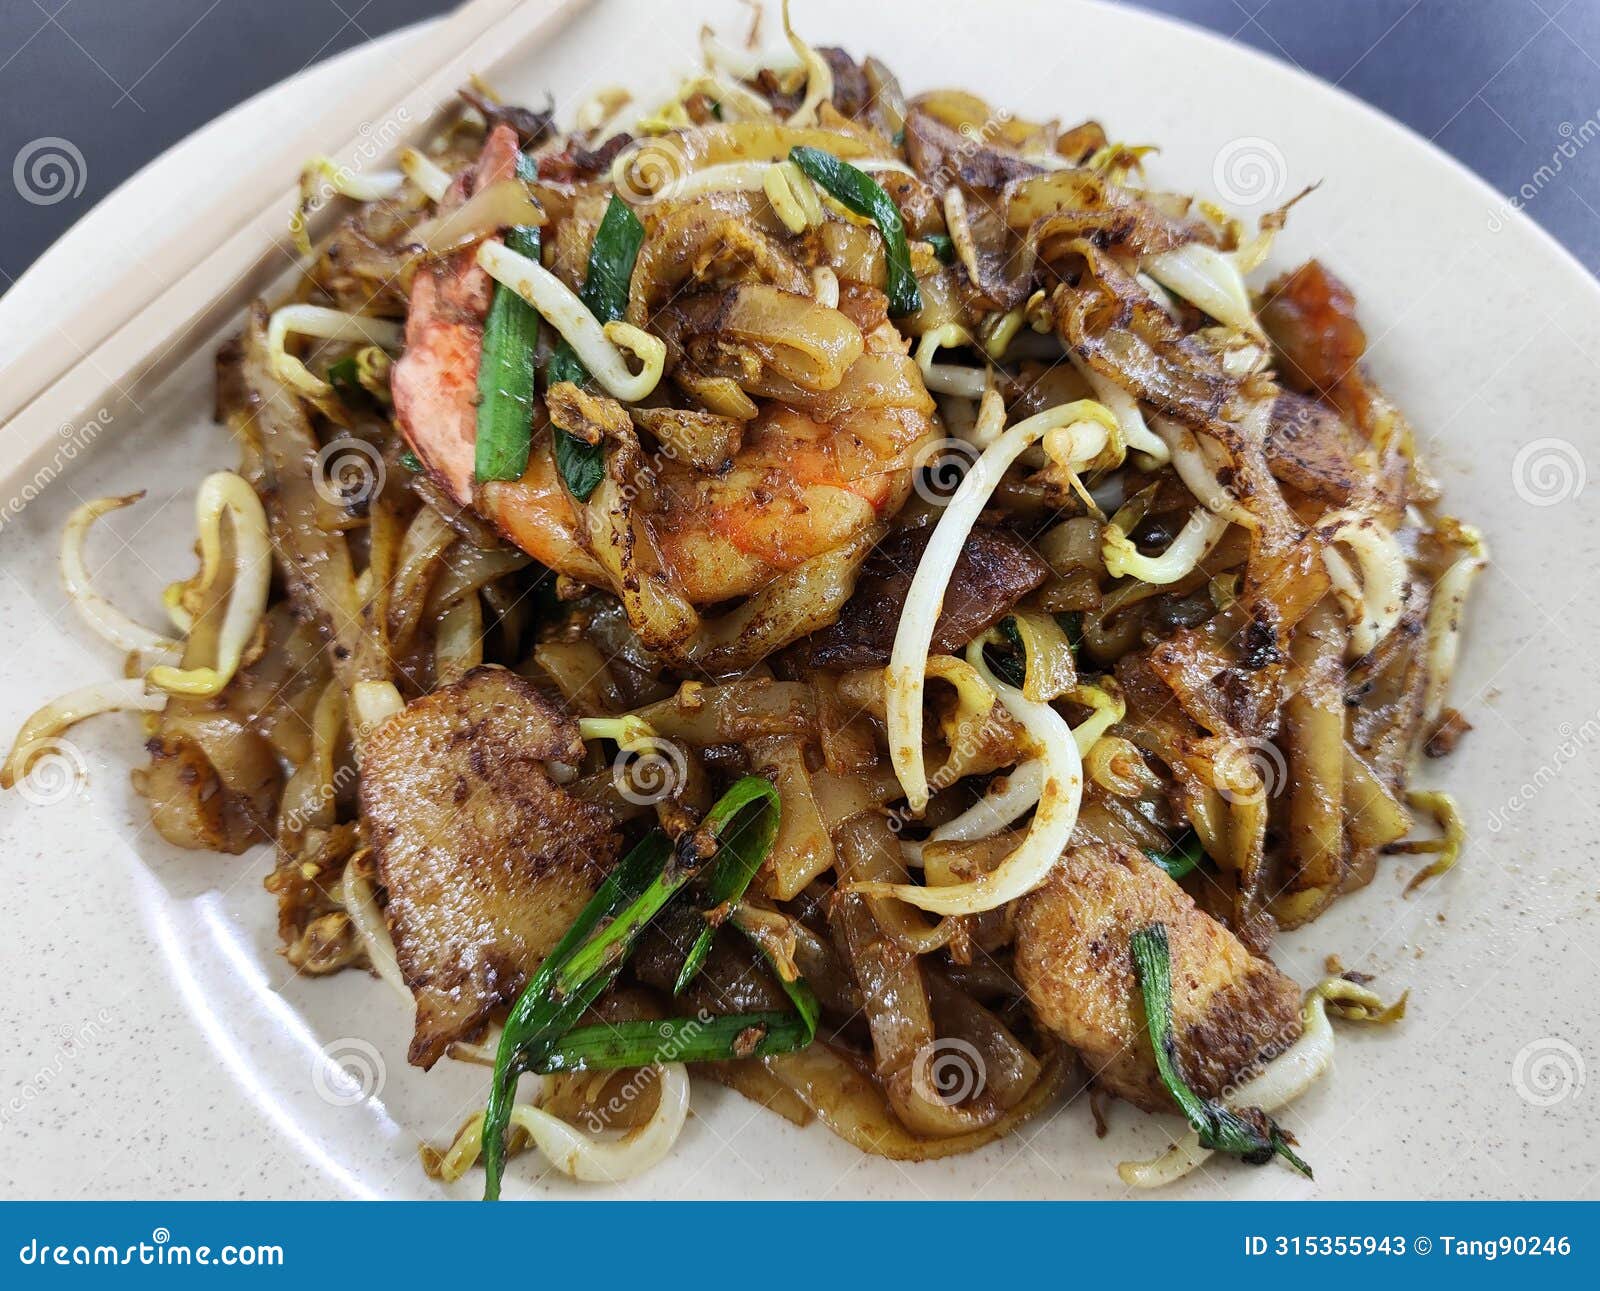 famous penang char kuey teow with prawns